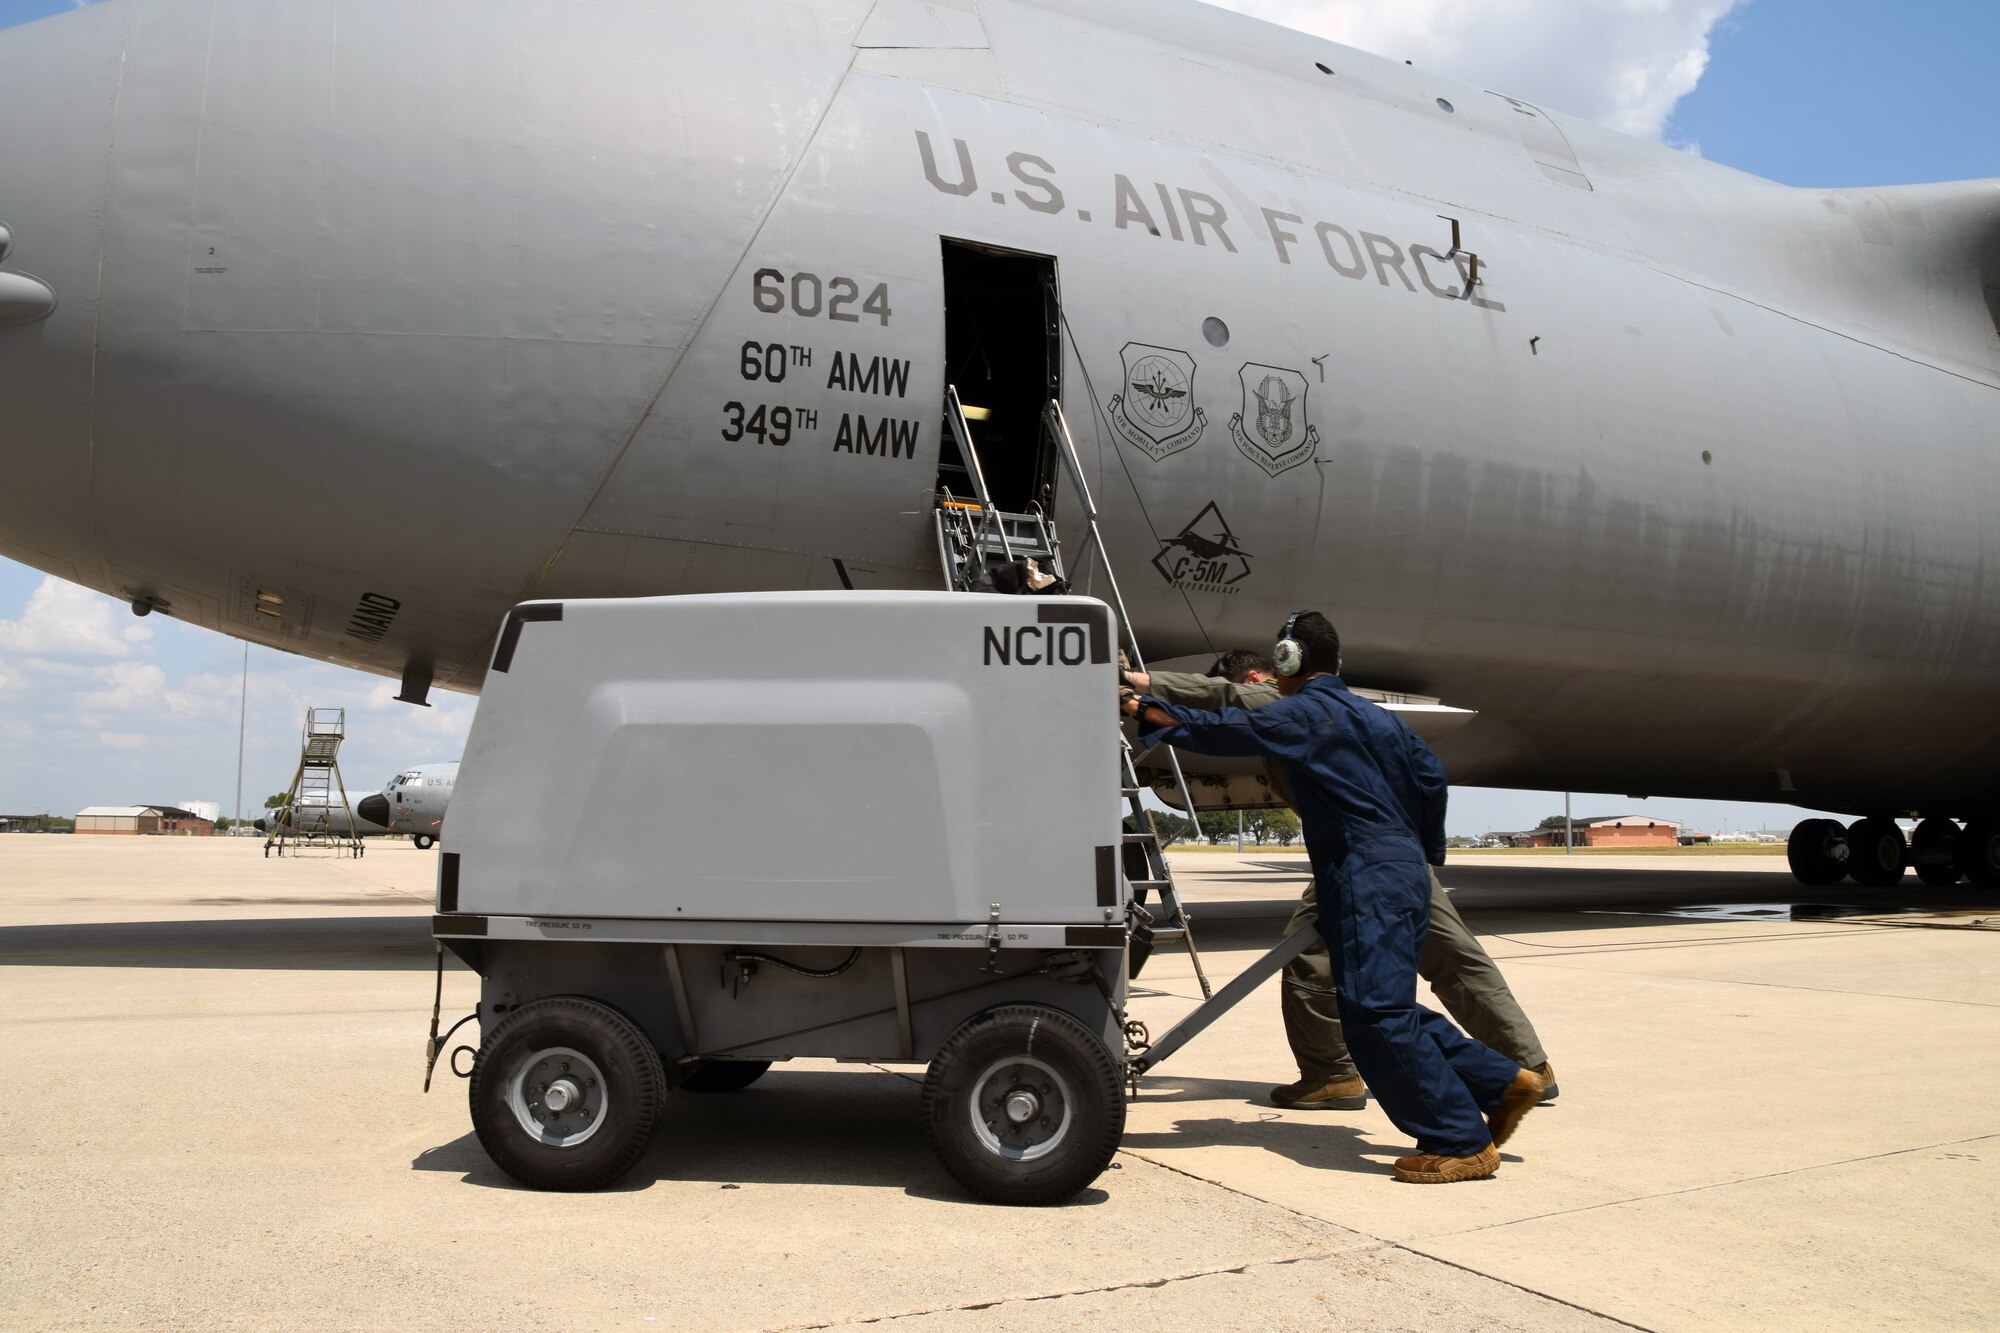 Staff Sgt. Michael Hailemaskel and Senior Airman Glenn C. Bovino II, both with the 60th Aircraft Maintenance Squadron at Travis Air Force Base, California, move an aircraft ground support cart so the C-5M Super Galaxy can depart the airfield Aug. 24, 2020 at Joint Base San Antonio-Lackland, Texas.